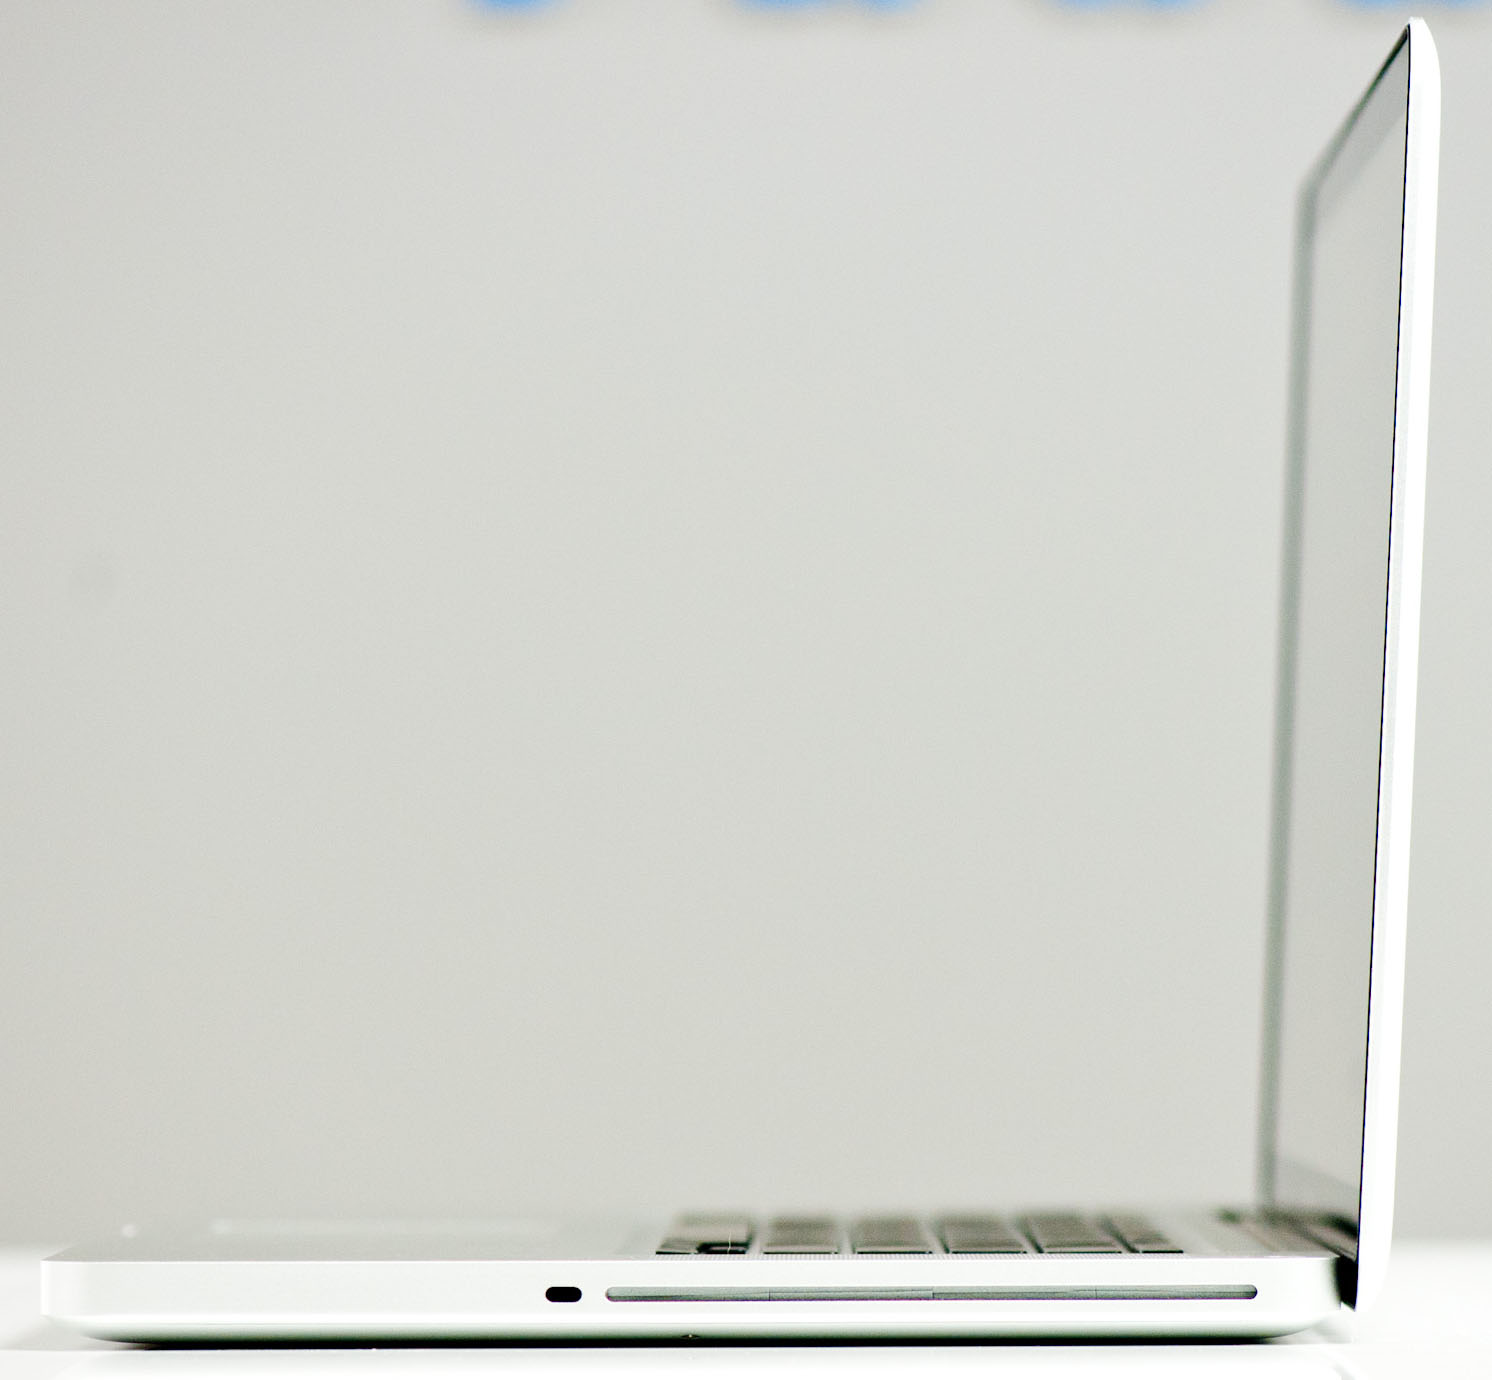 Apple MacBook Pro 15 (Late 2011) - Specs, Tests, and Prices 